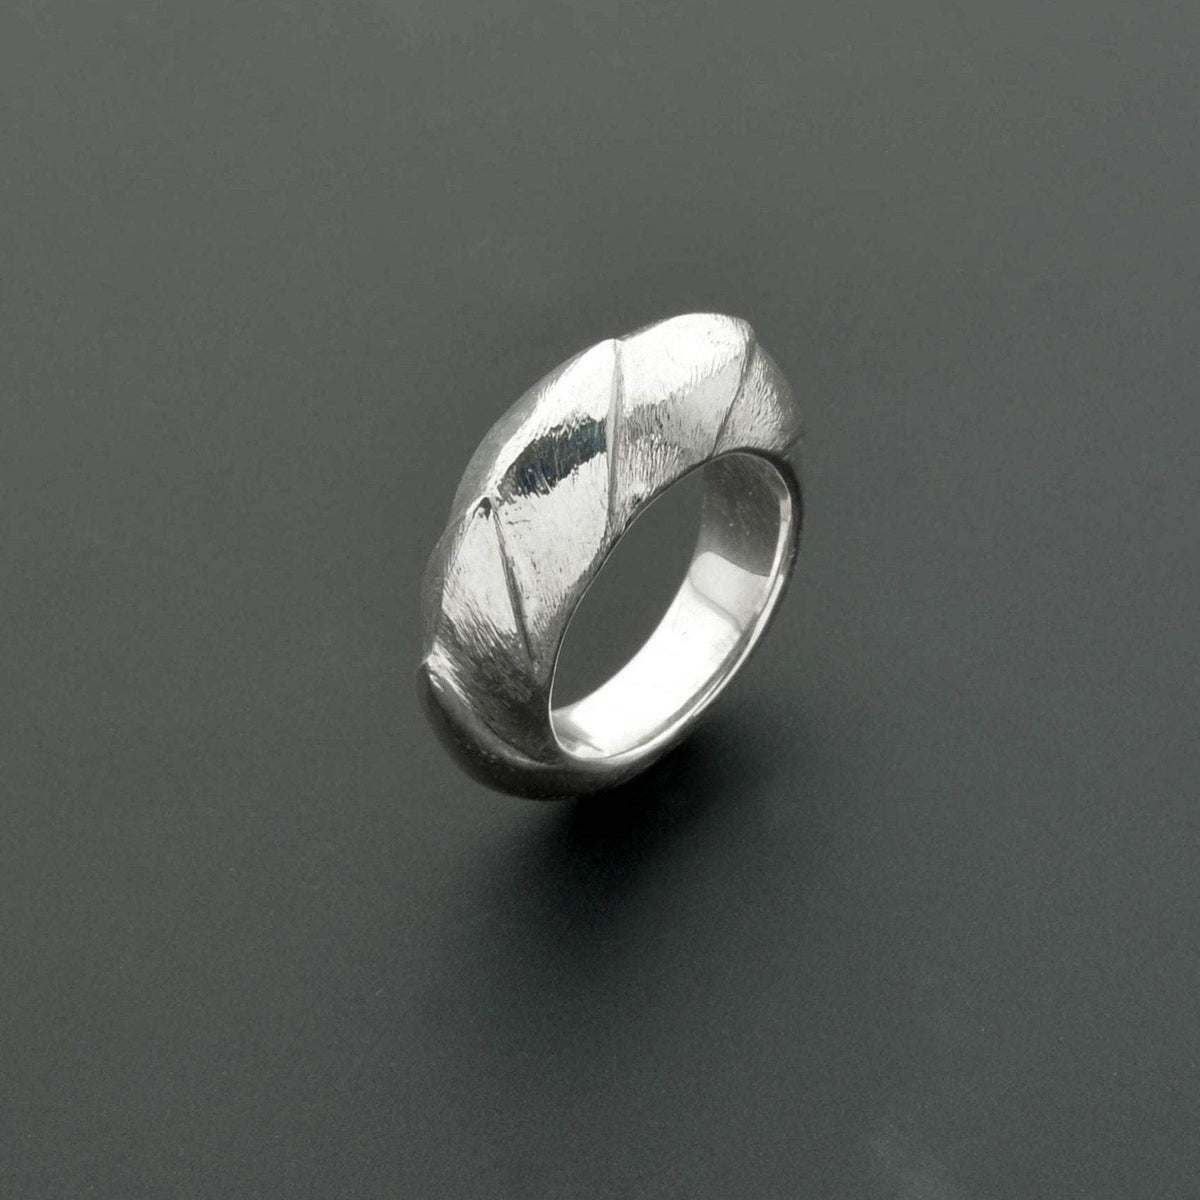 Scale dome sterling silver ring